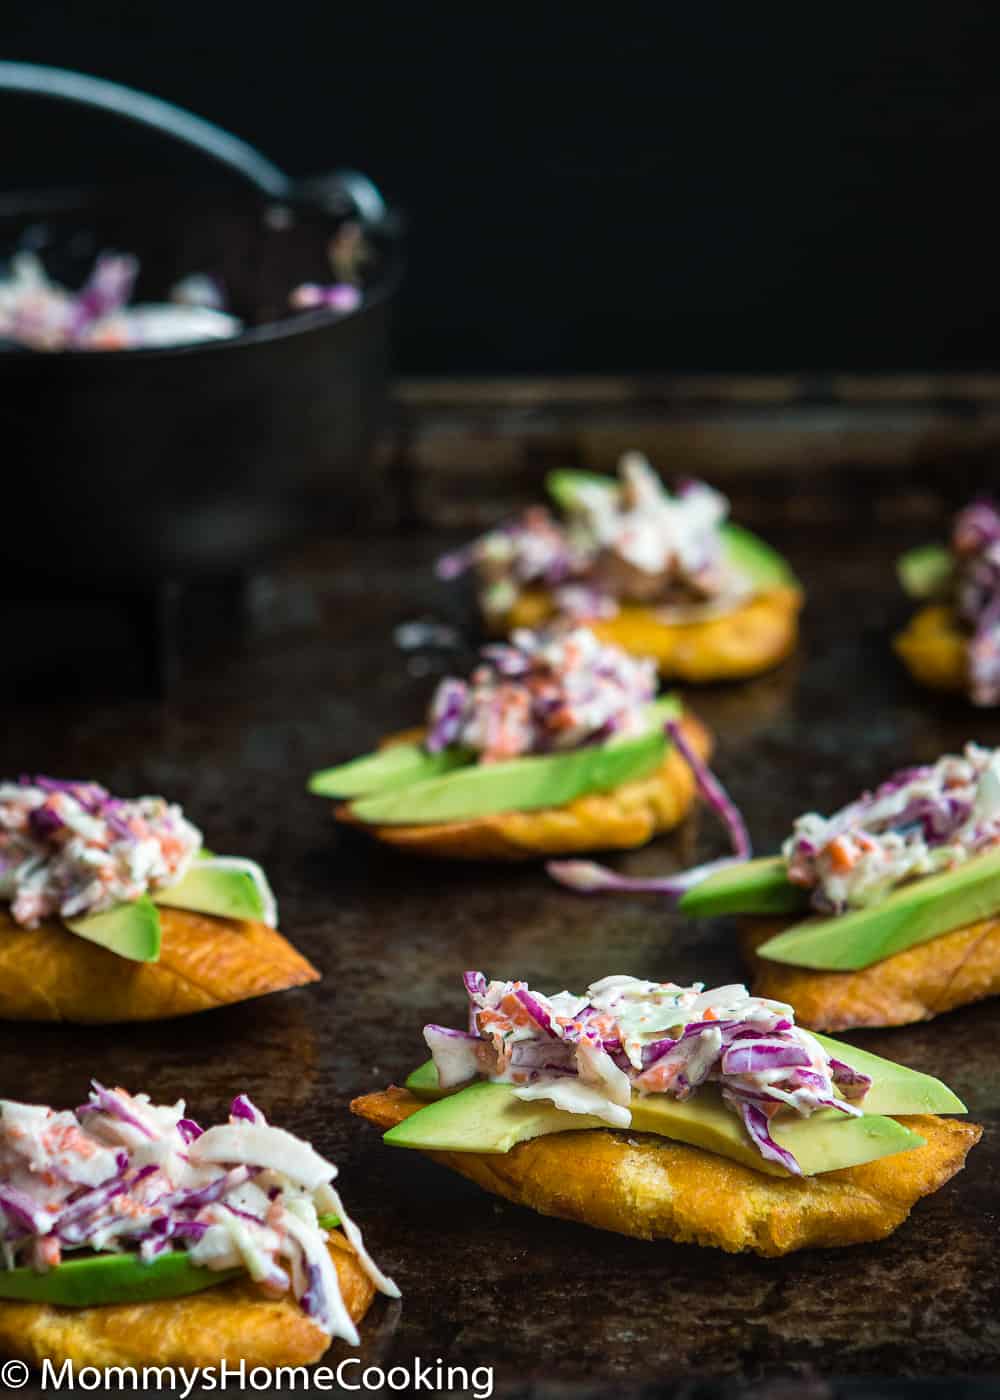 Tostones with sliced avocado and coleslaw salad